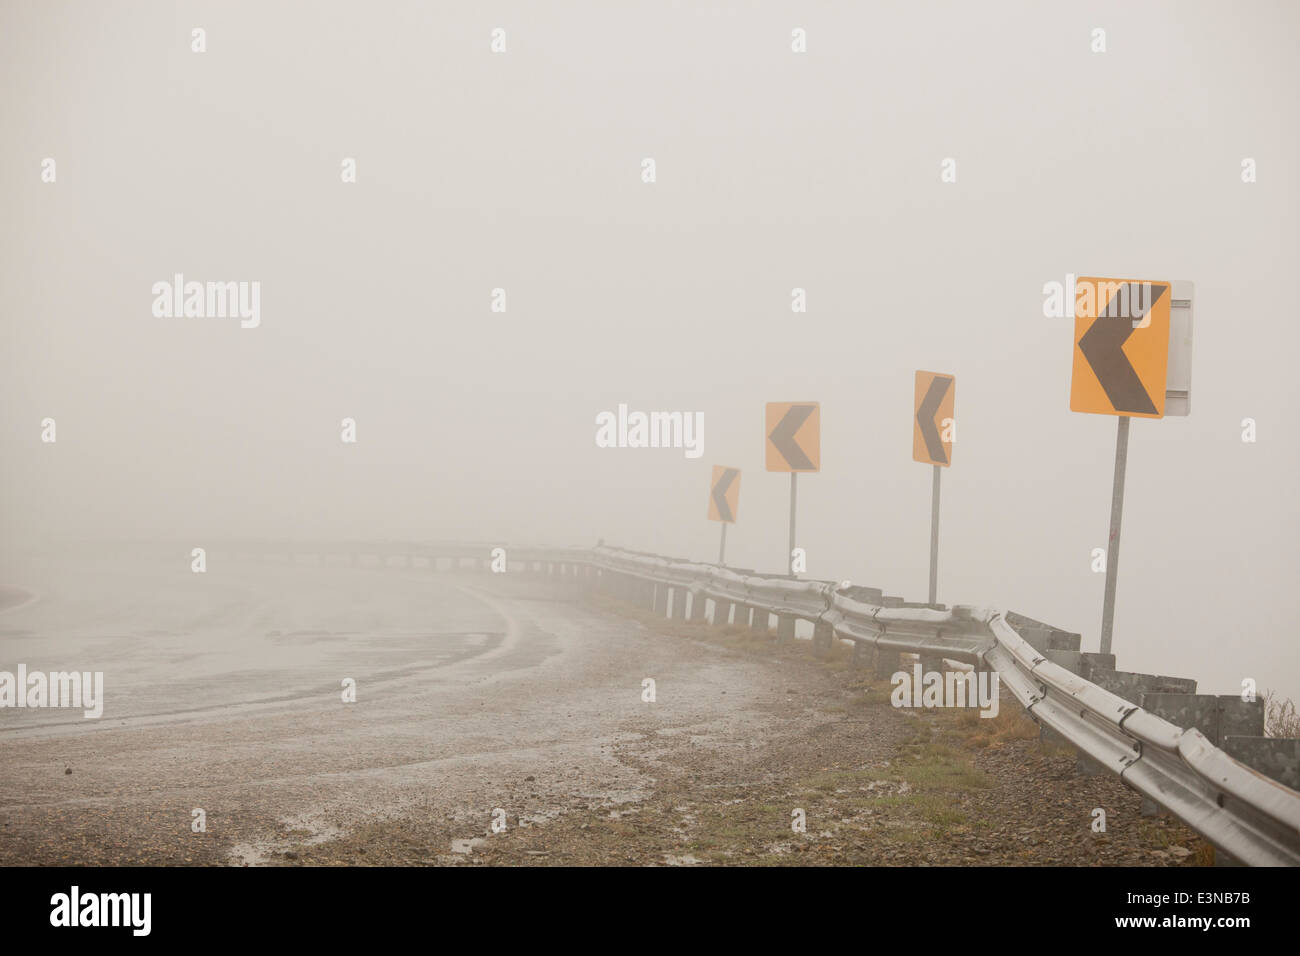 Empty road with arrow symbols against clear sky Stock Photo